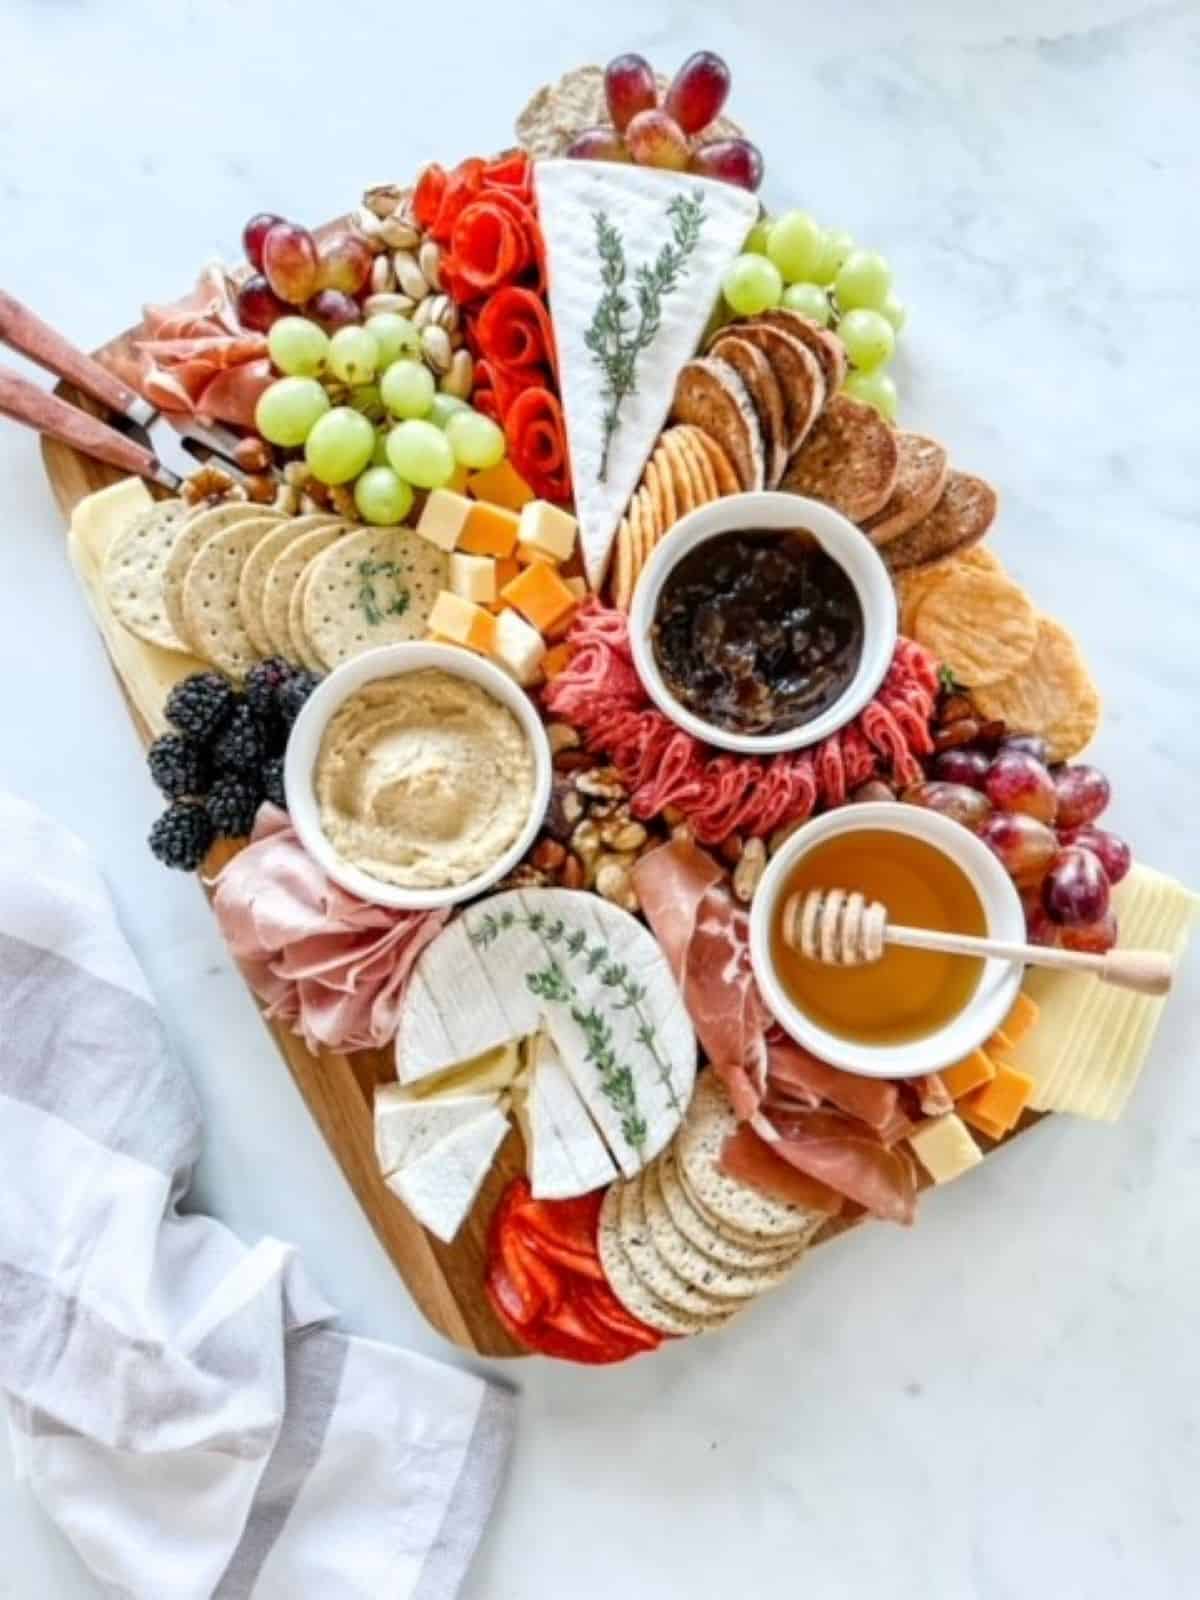 A gluten-free meat and cheese board featuring speciality ingredients.